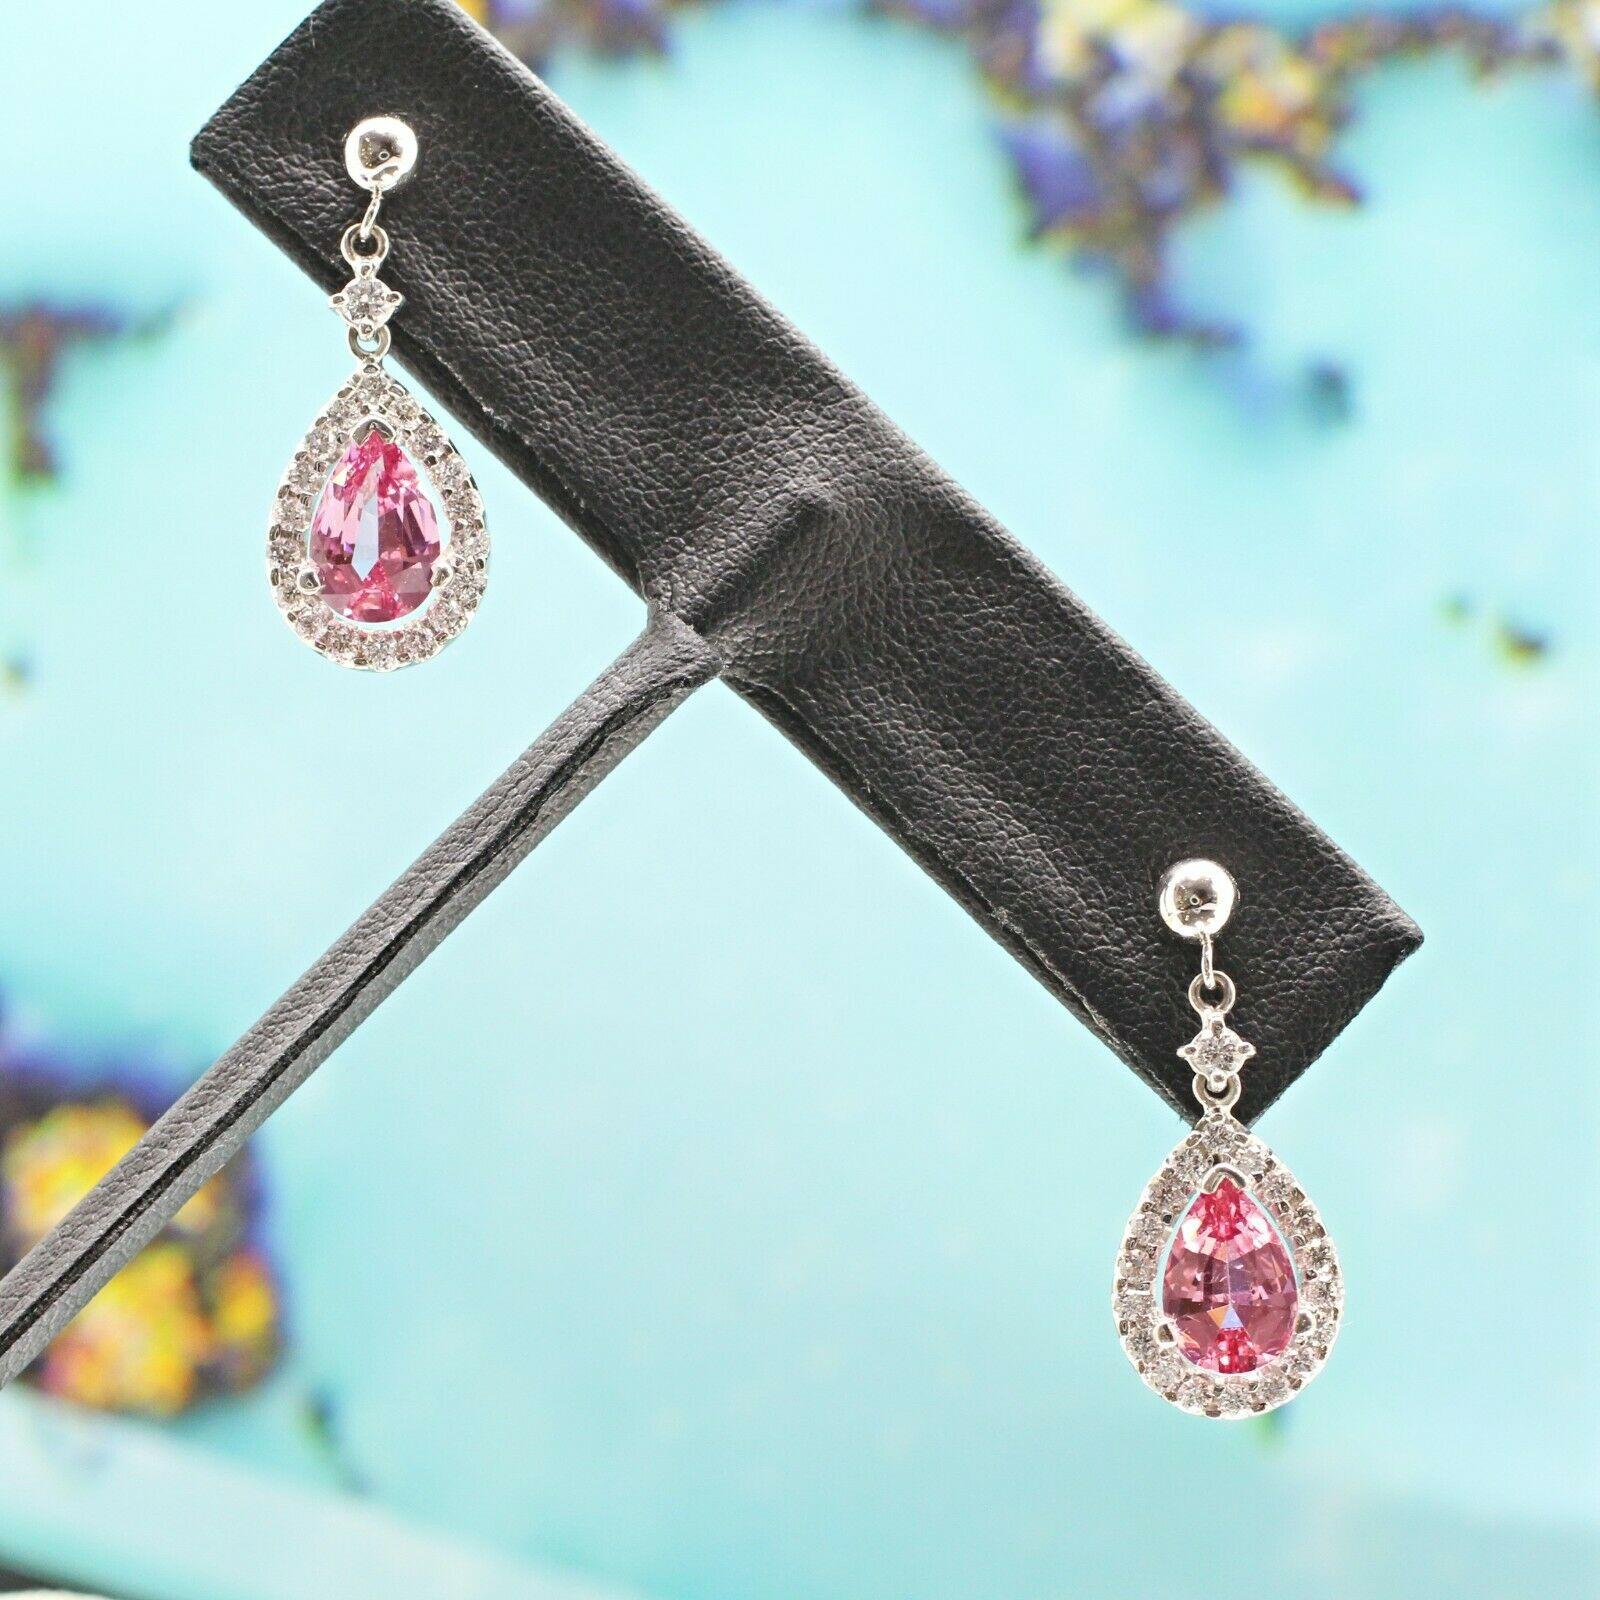  Theses are a pair of beautiful Pink spinel pear shaped earrings weighing 2.46 carat and surrounded by 38 pieces of round cut diamonds in approximately 0.50 carat total weight. The earrings are crafted in 14K white gold.
Specifications:
    main